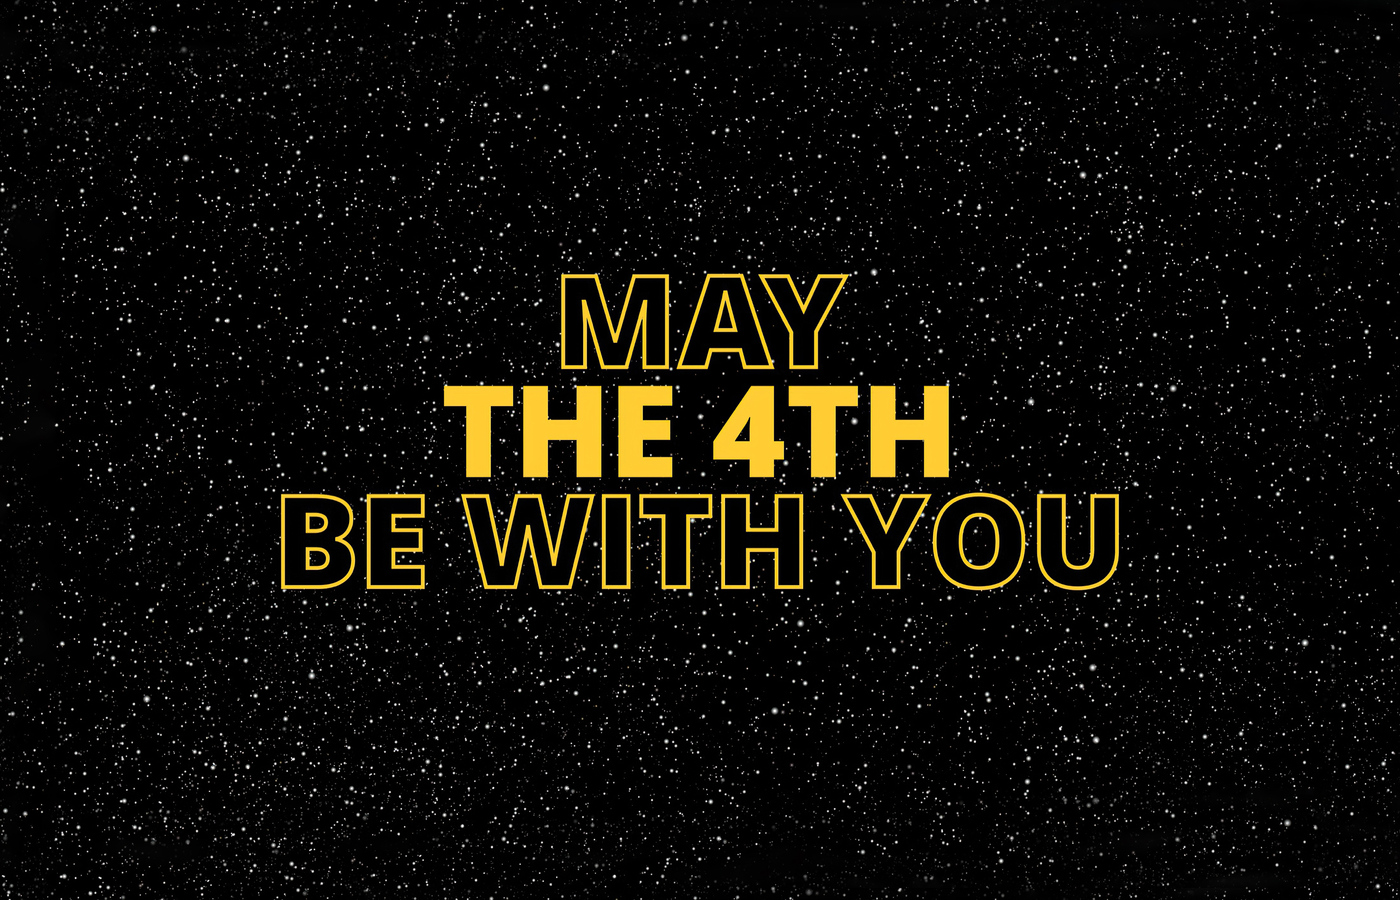 1400x900 Star Wars May The 4th Be With You 1400x900 Resolution HD 4k May The 4th Be With You Wallpaper